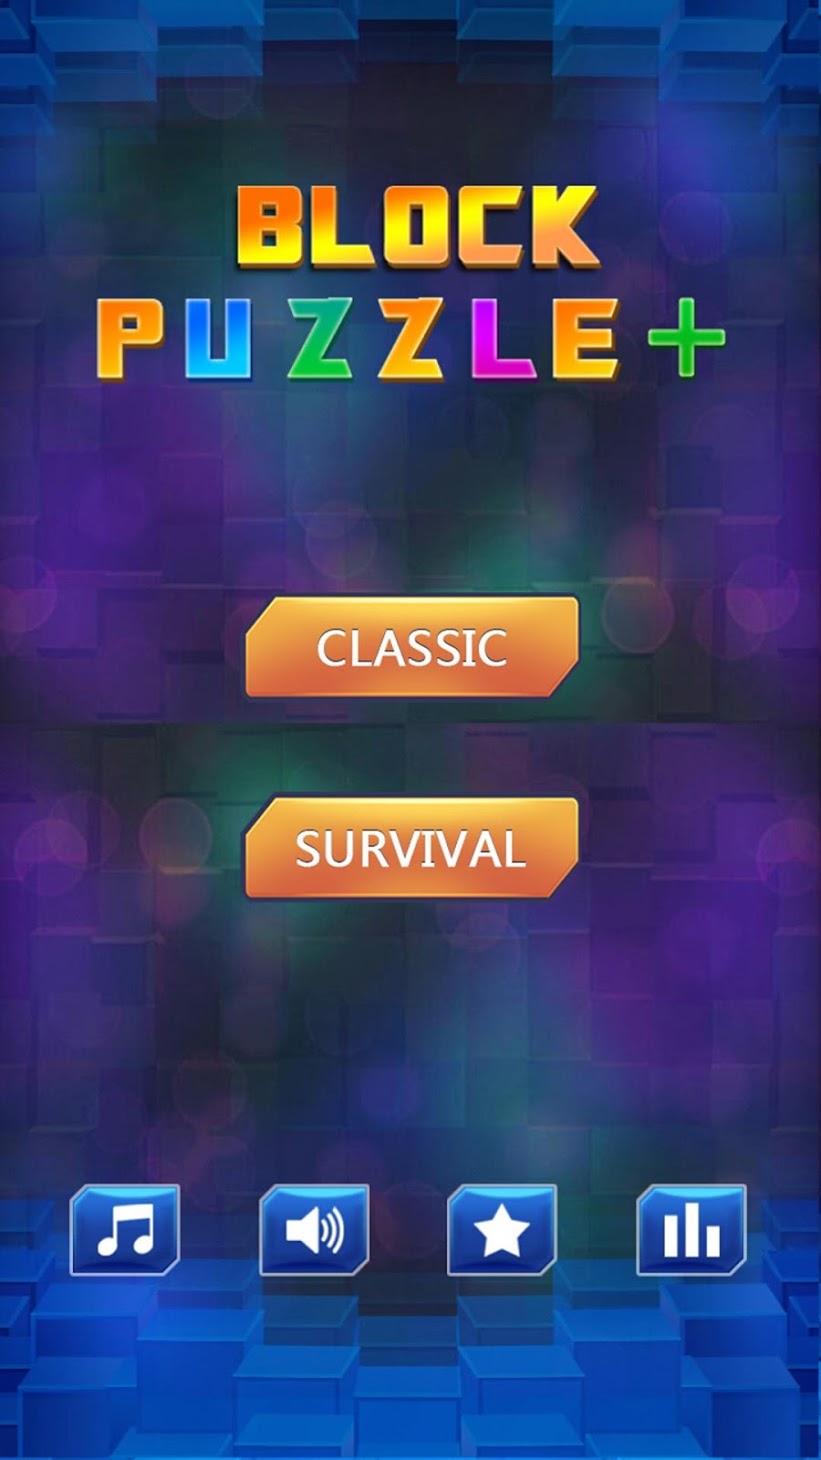 download the last version for android Blocks: Block Puzzle Games